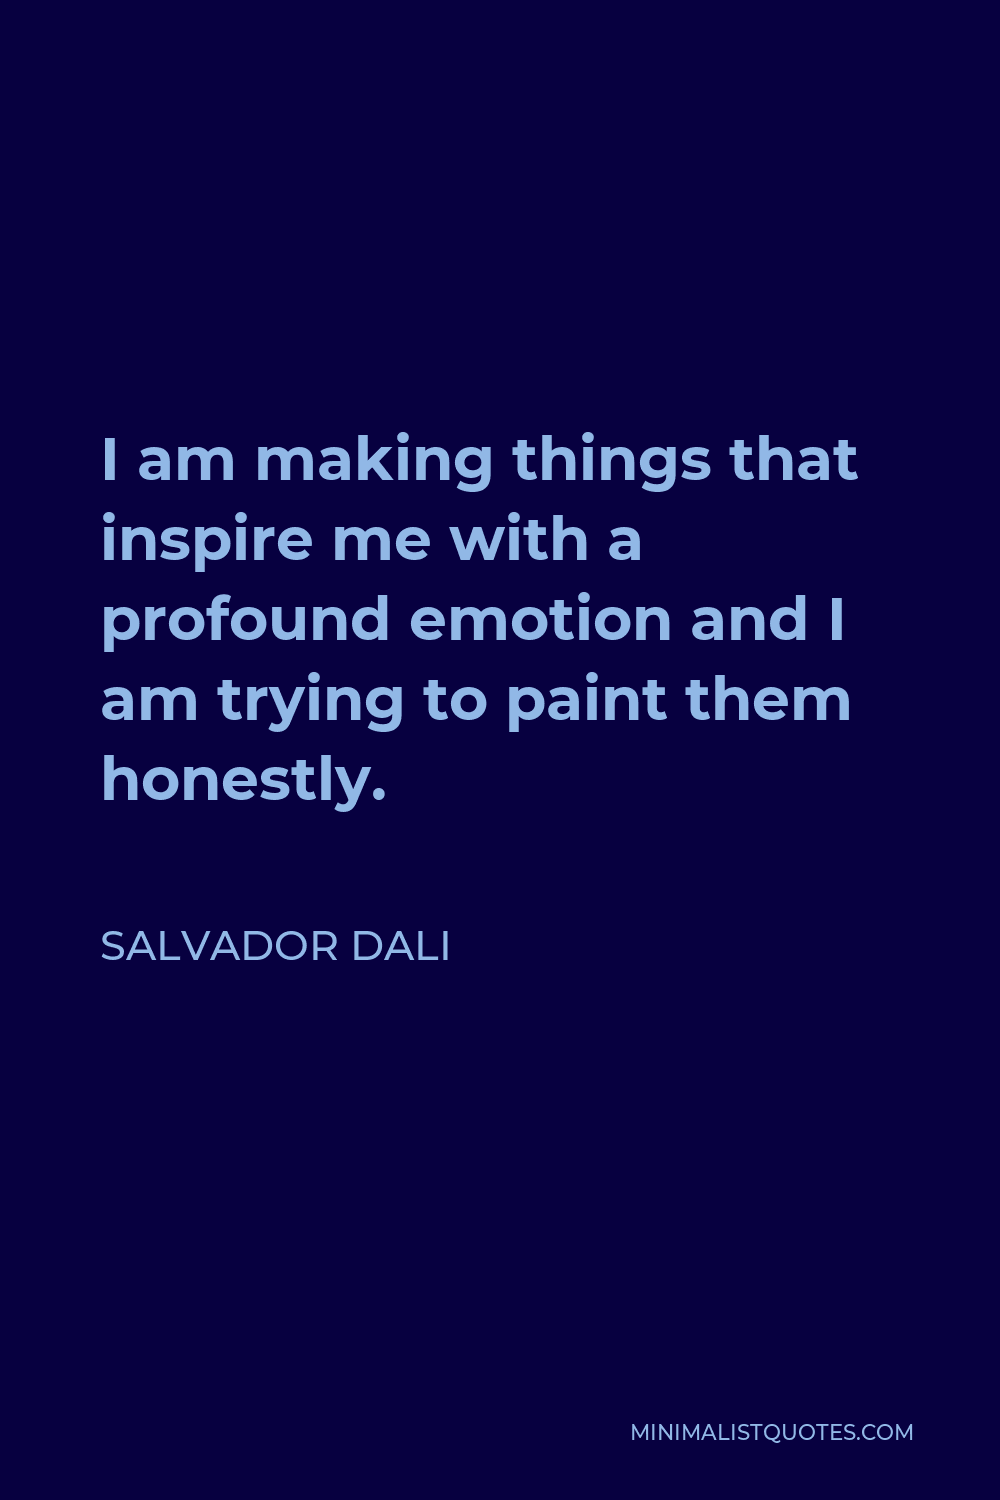 Salvador Dali Quote - I am making things that inspire me with a profound emotion and I am trying to paint them honestly.